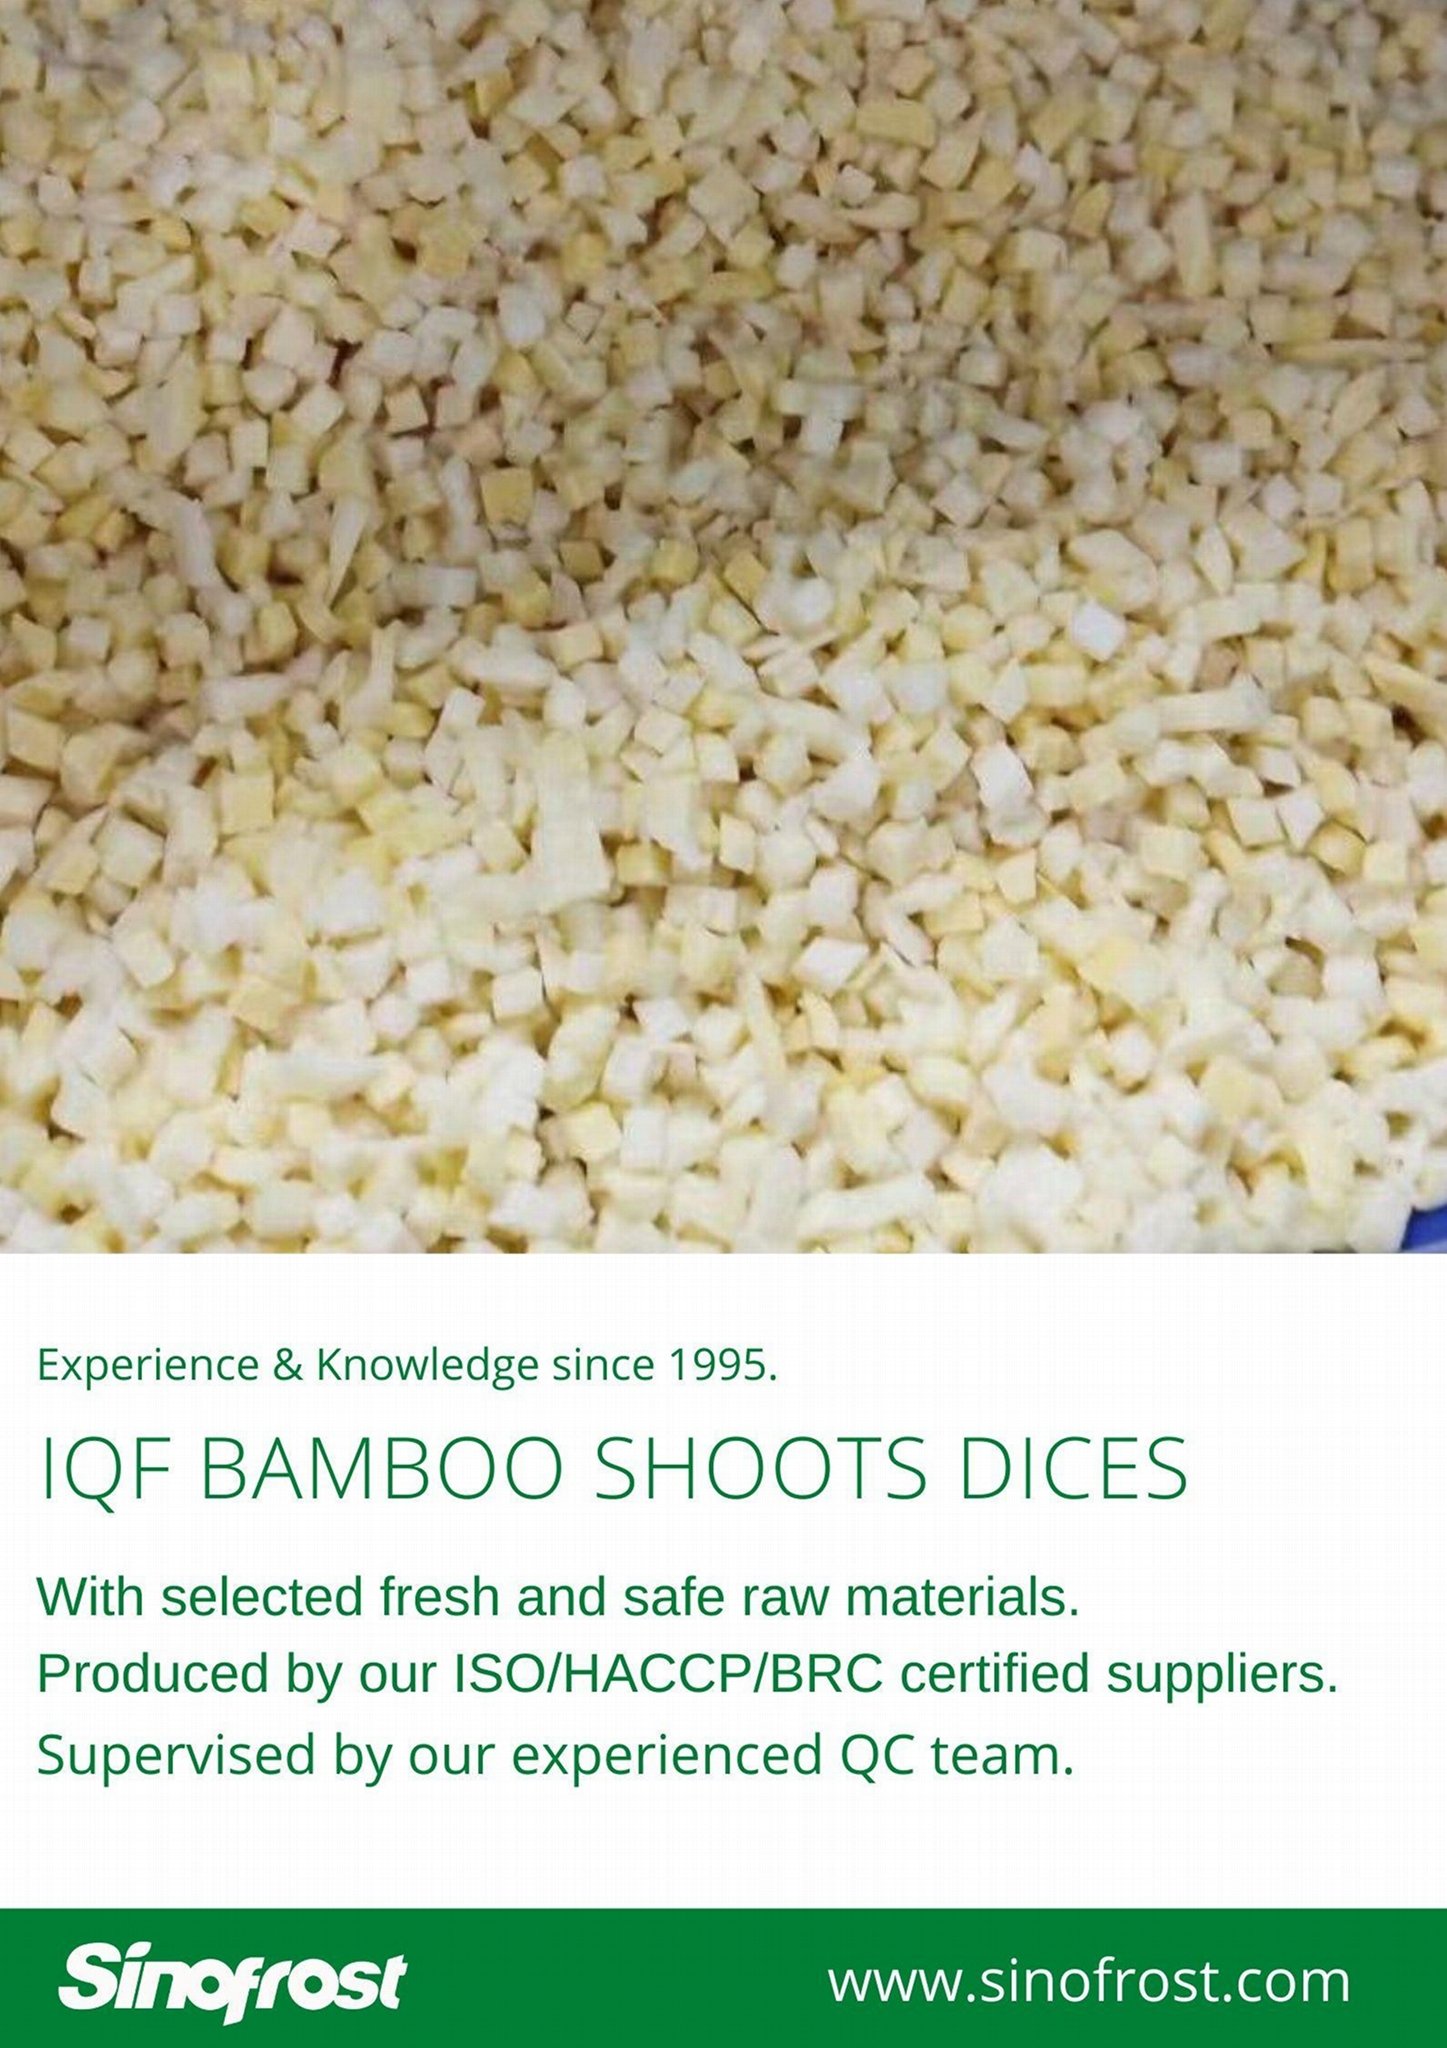 IQF bamboo shoot dices,Frozen bamboo shoot dices,IQF diced bamboo shoots 5